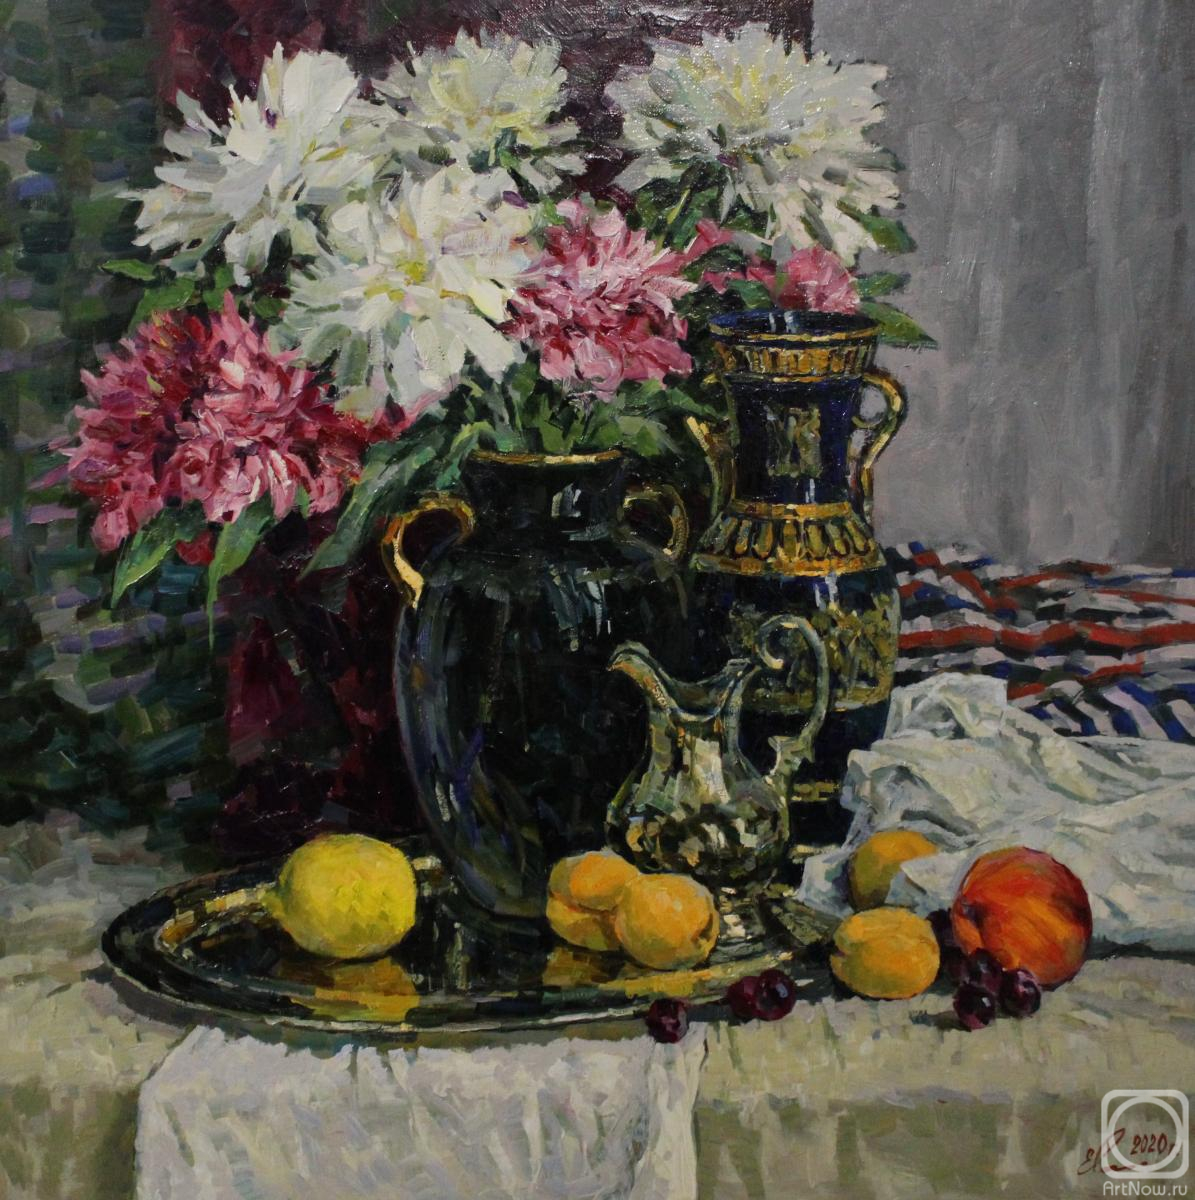 Malykh Evgeny. Peonies and fruits